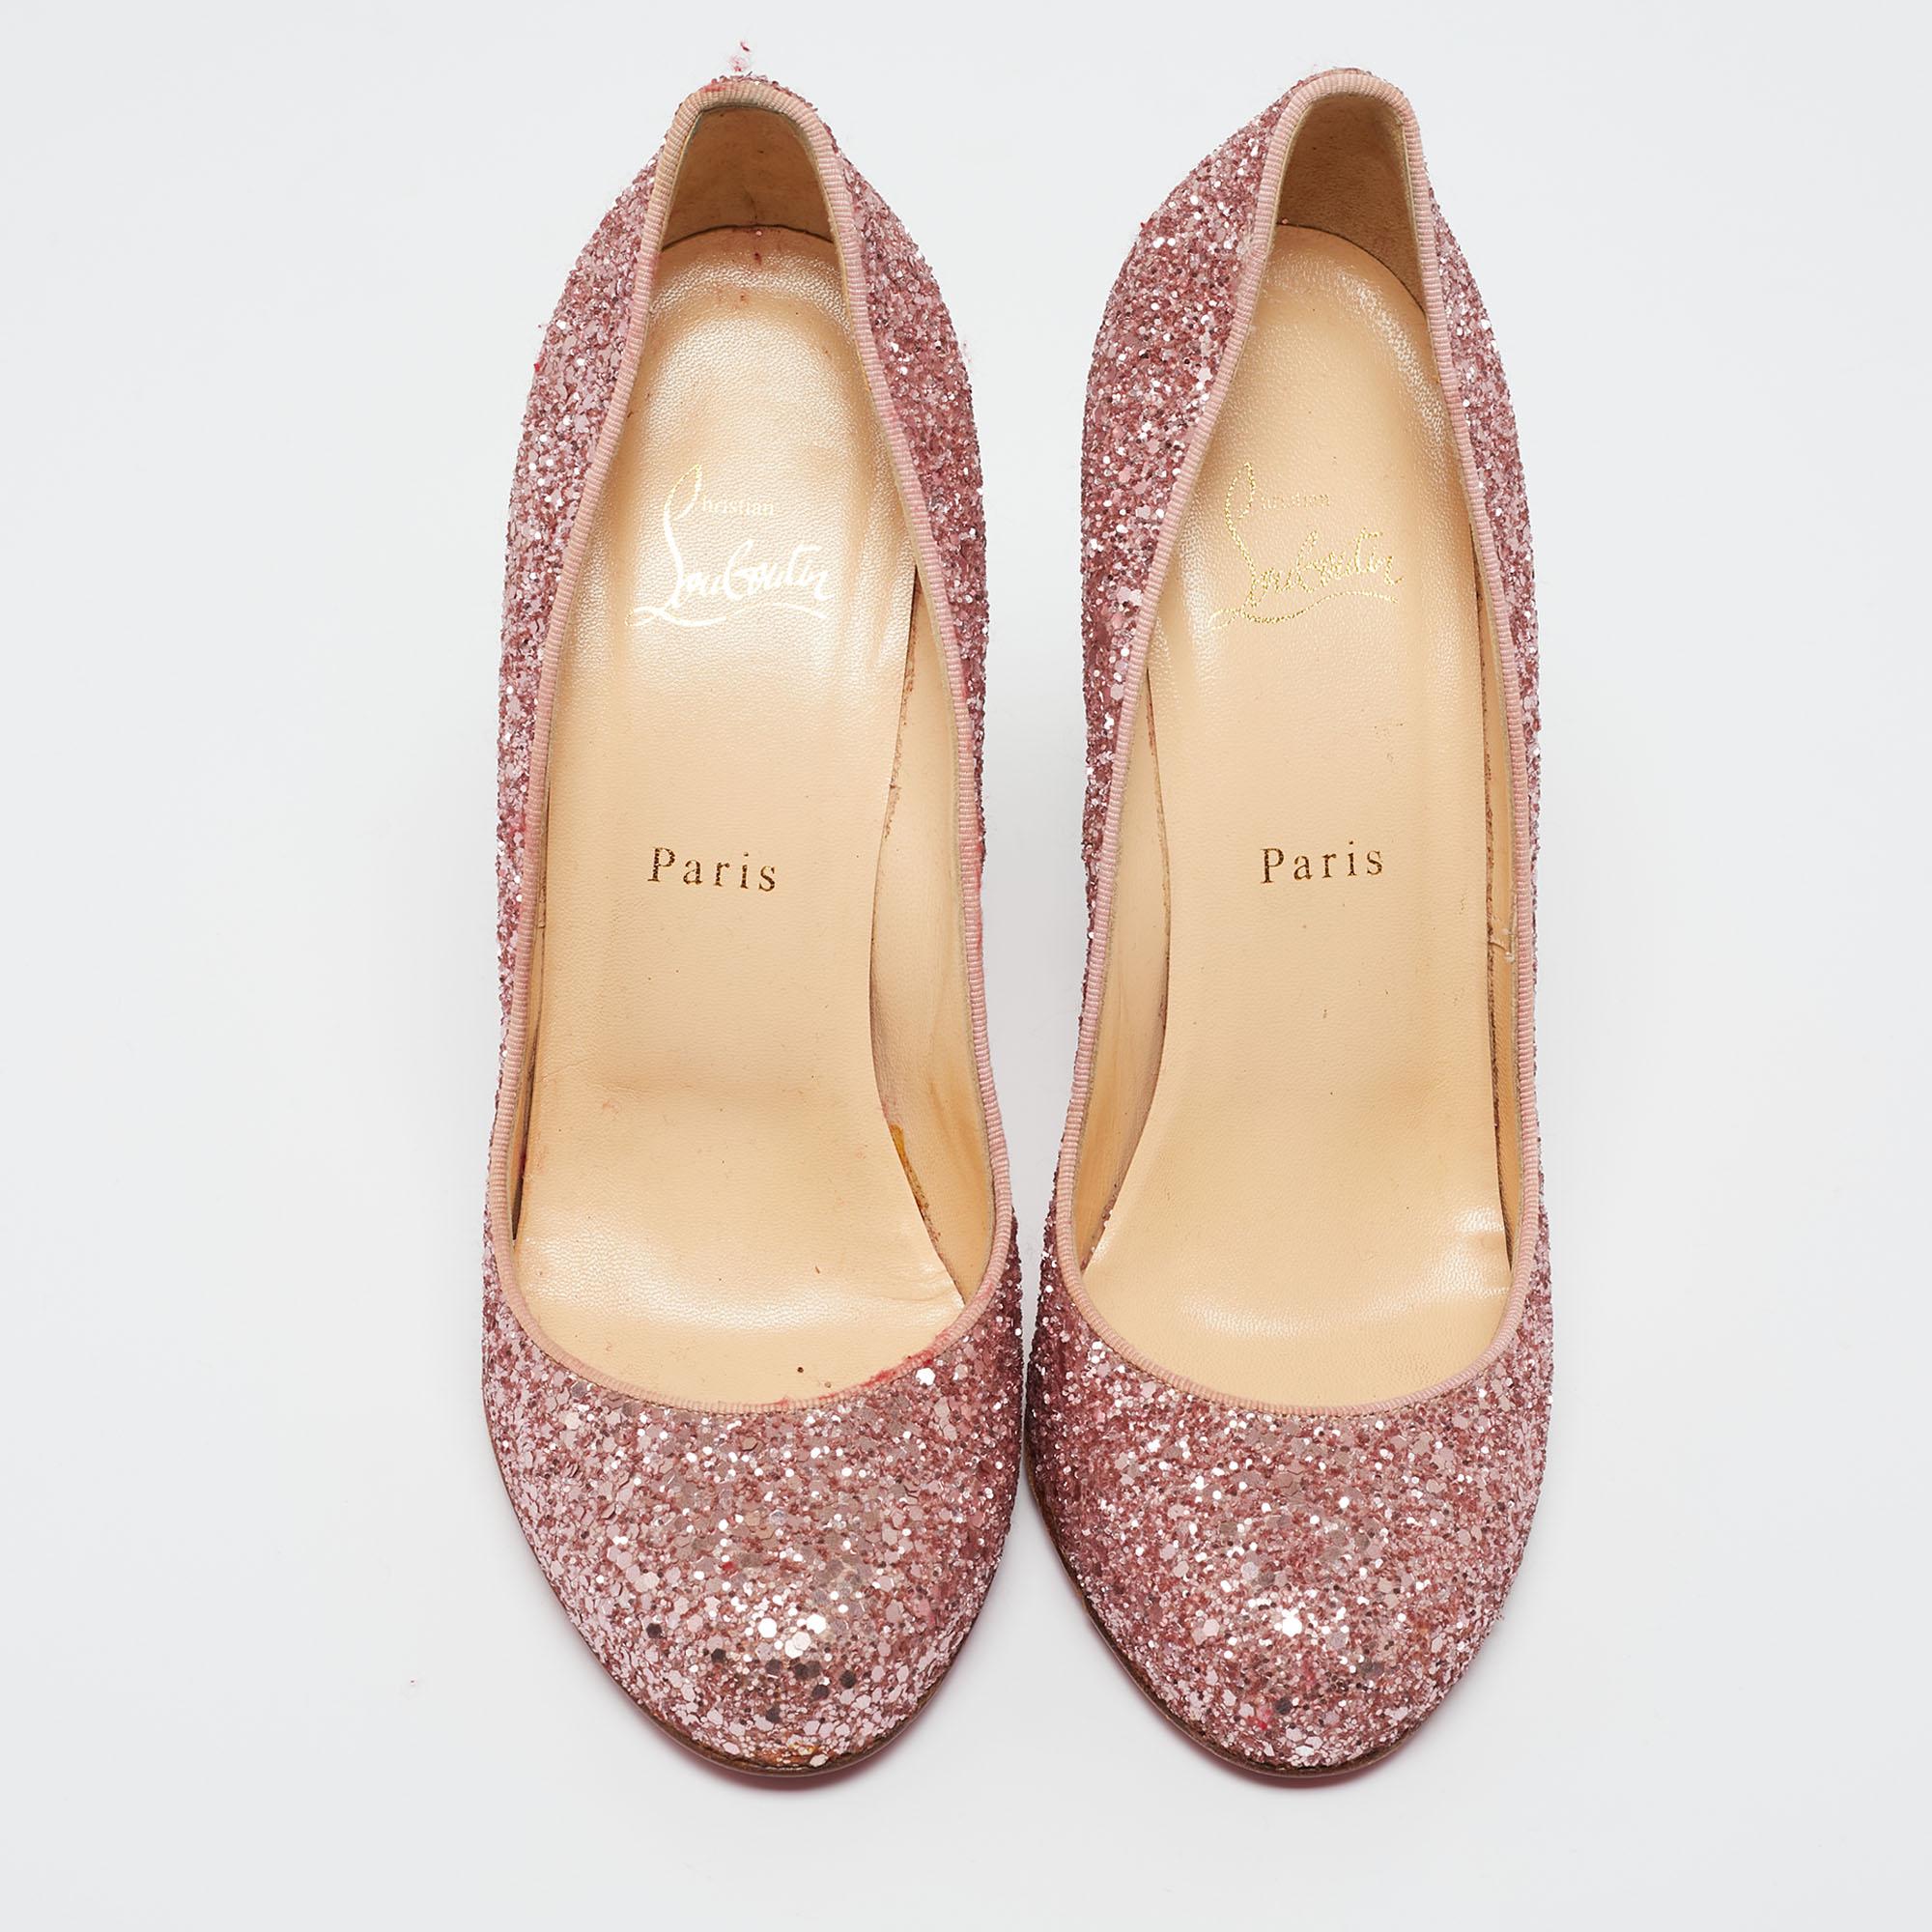 Feel glamorous every time you slip into this glitzy pair by Christian Louboutin. Covered in pink glitter and balanced on 13 cm heels, these pumps will be a winner with all your well-tailored outfits. They are finished with the signature red on the